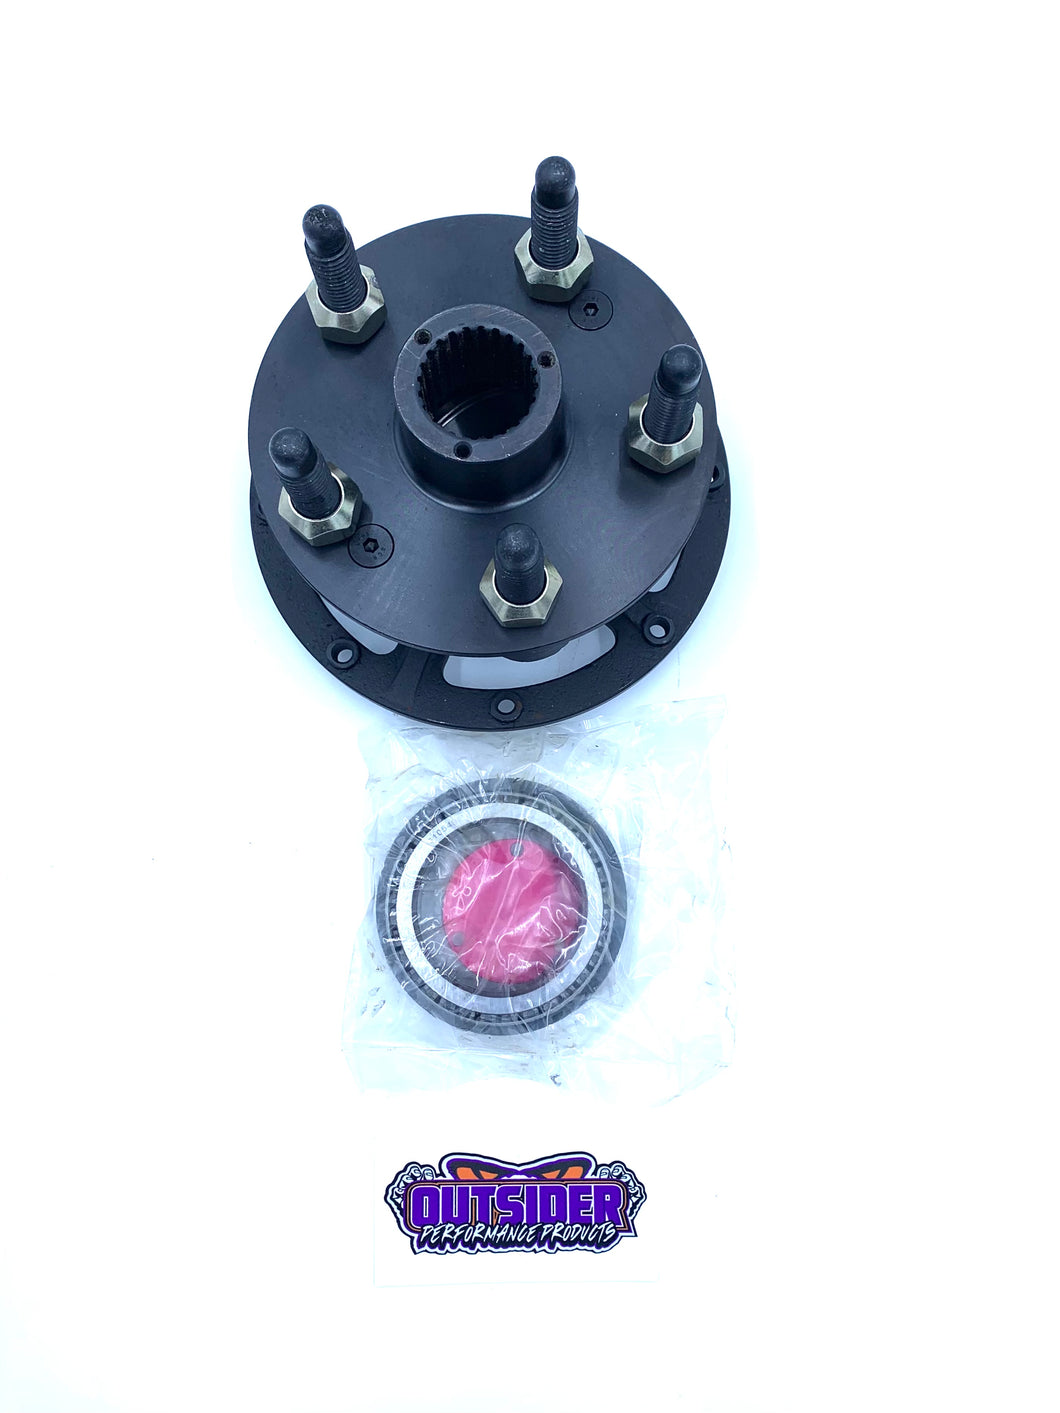 Outsider Performance Products Grand National 5x5 Hub Kit